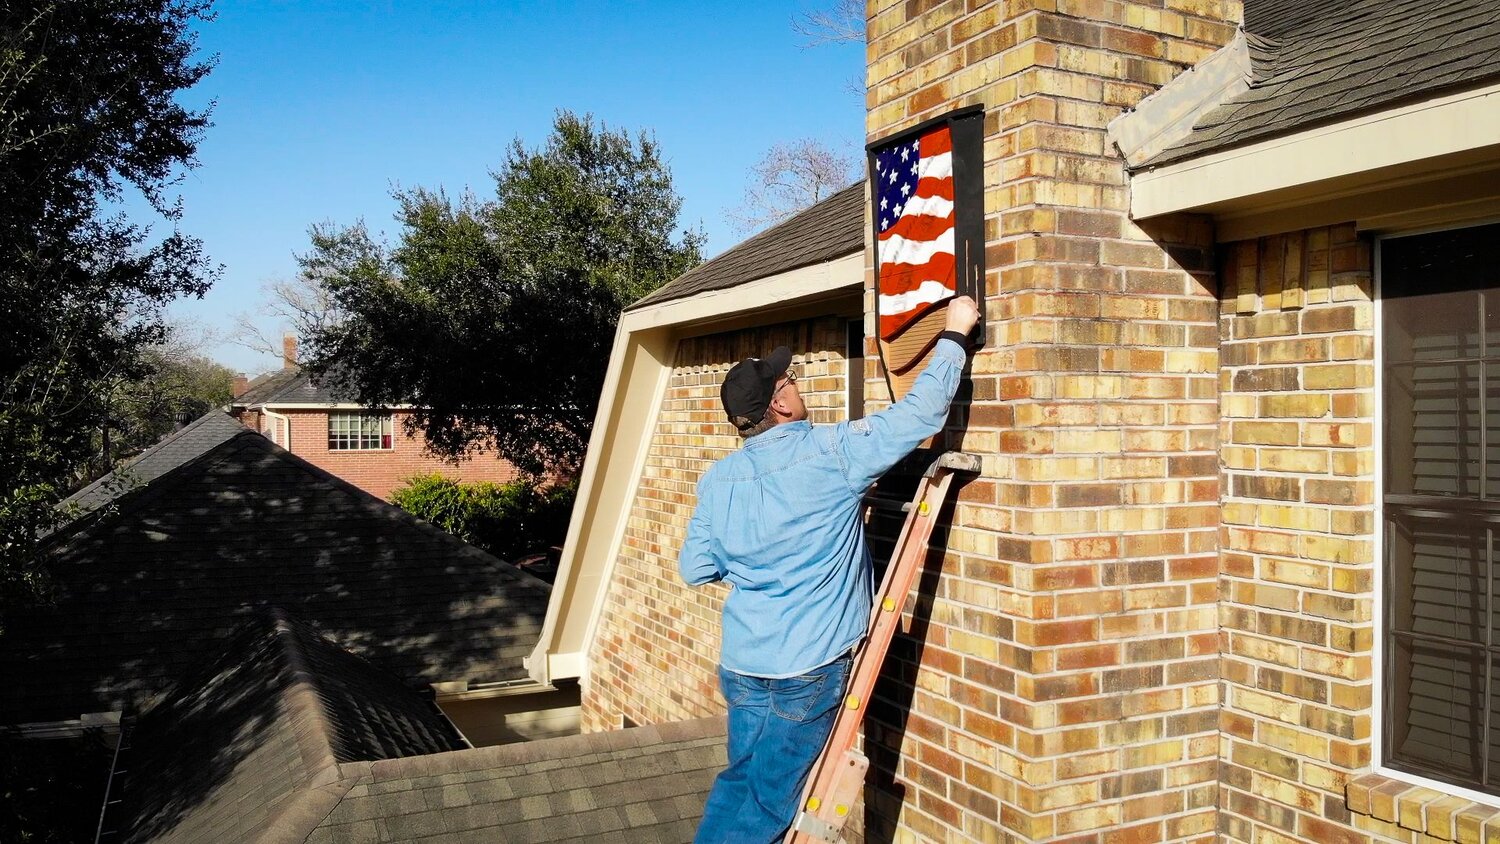 Installing a bat house. Learn more about bat houses here